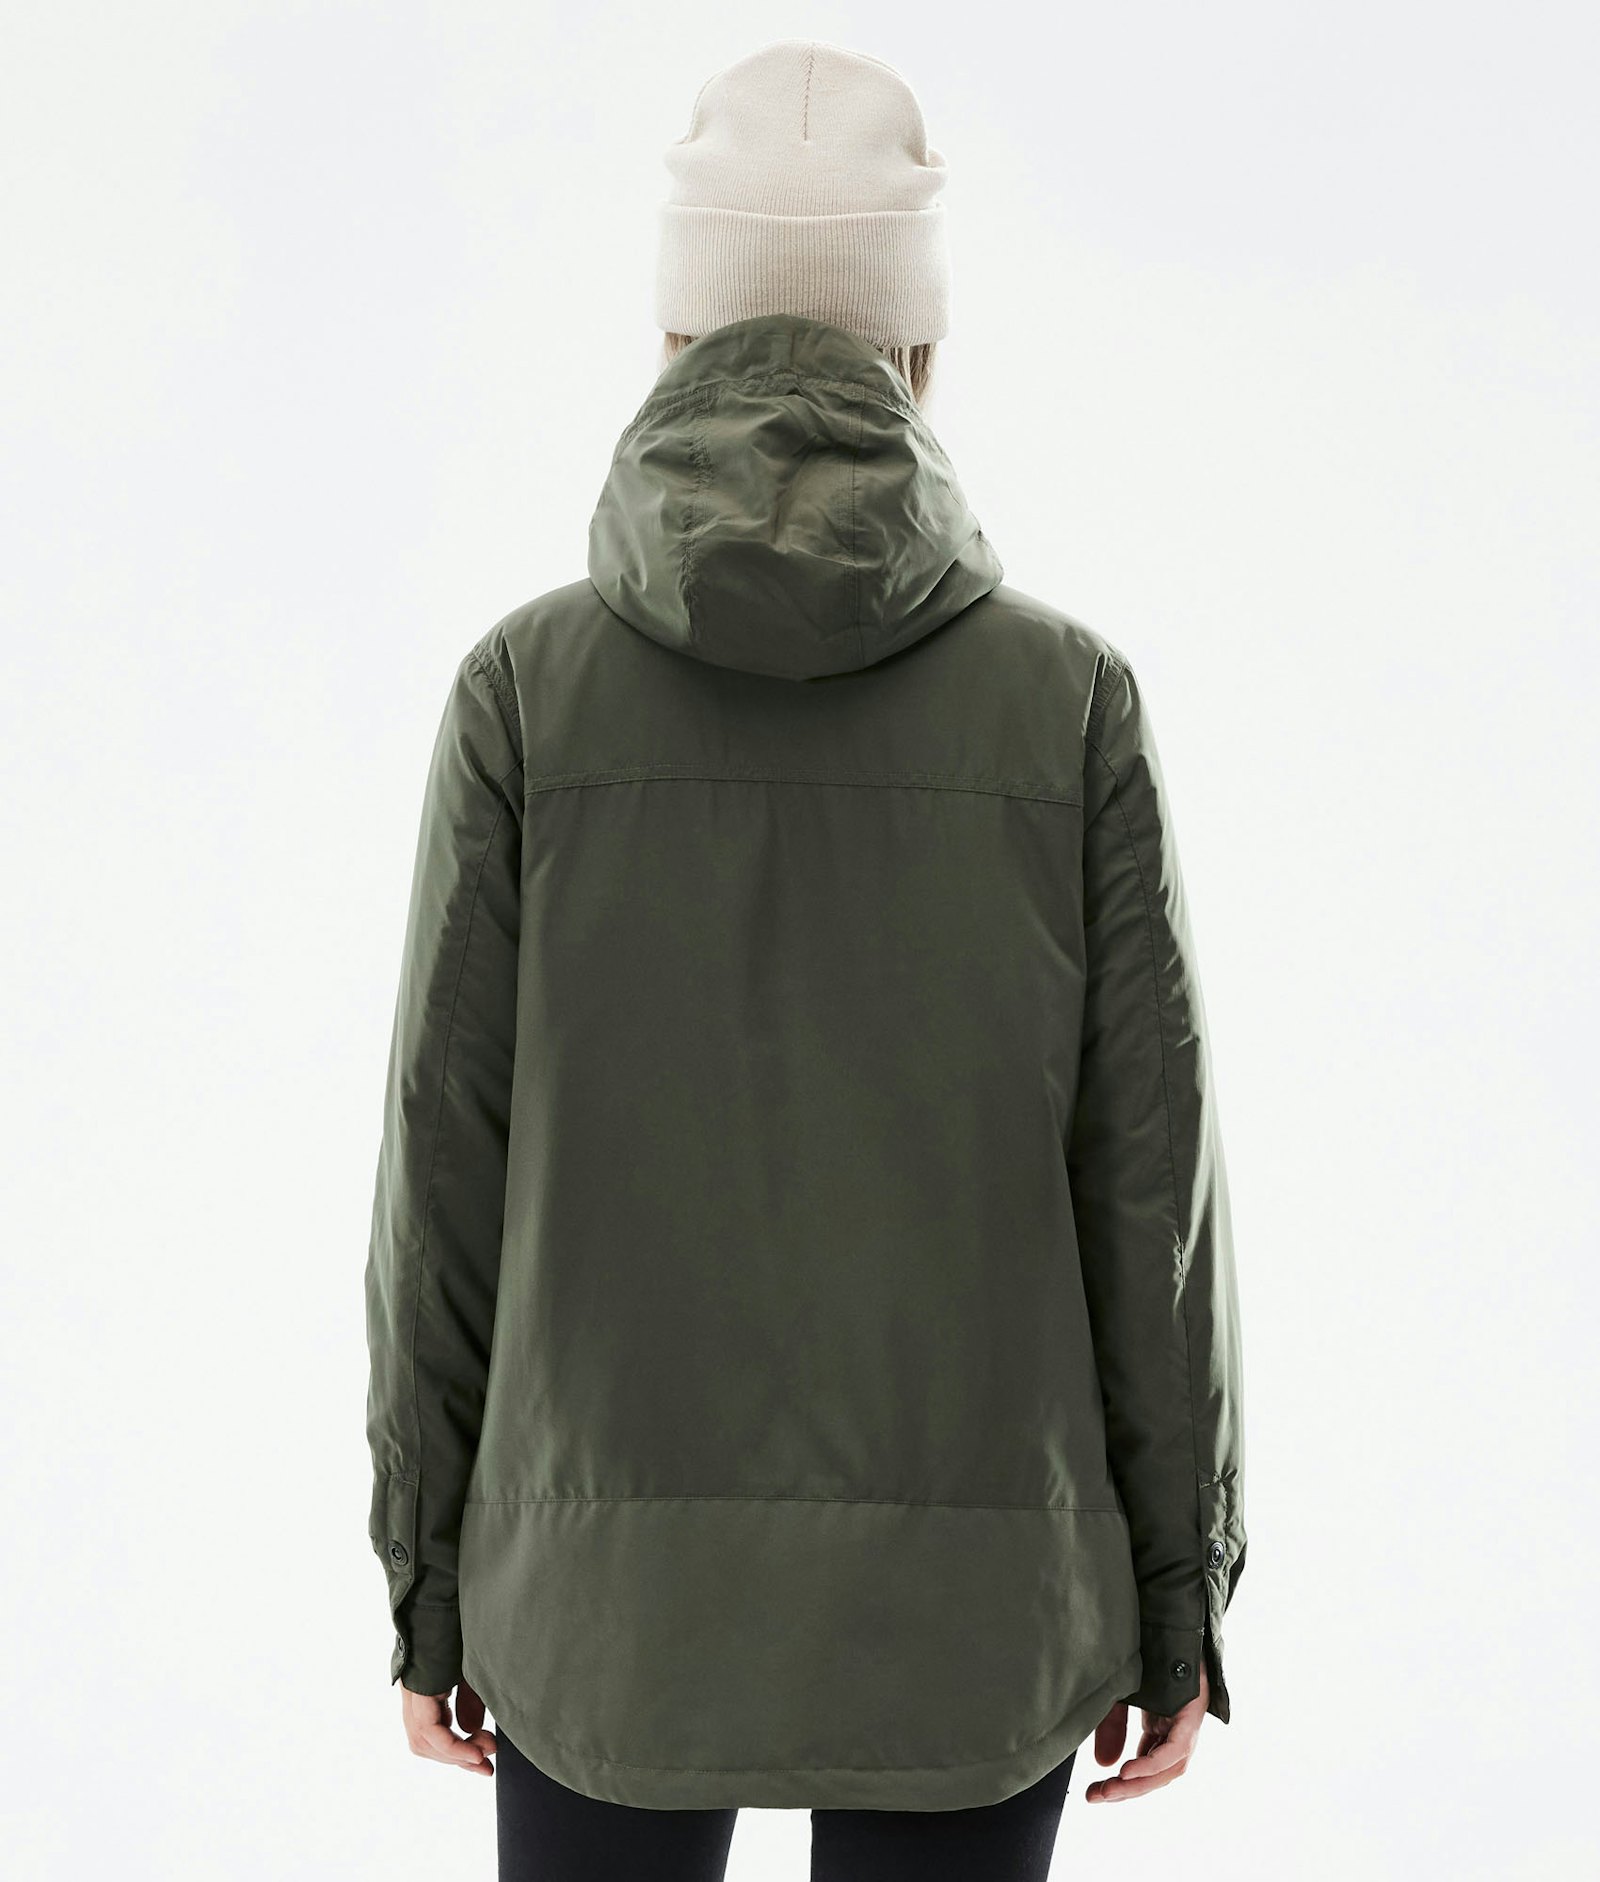 Dope Insulated W Midlayer Jacket Outdoor Women Olive Green